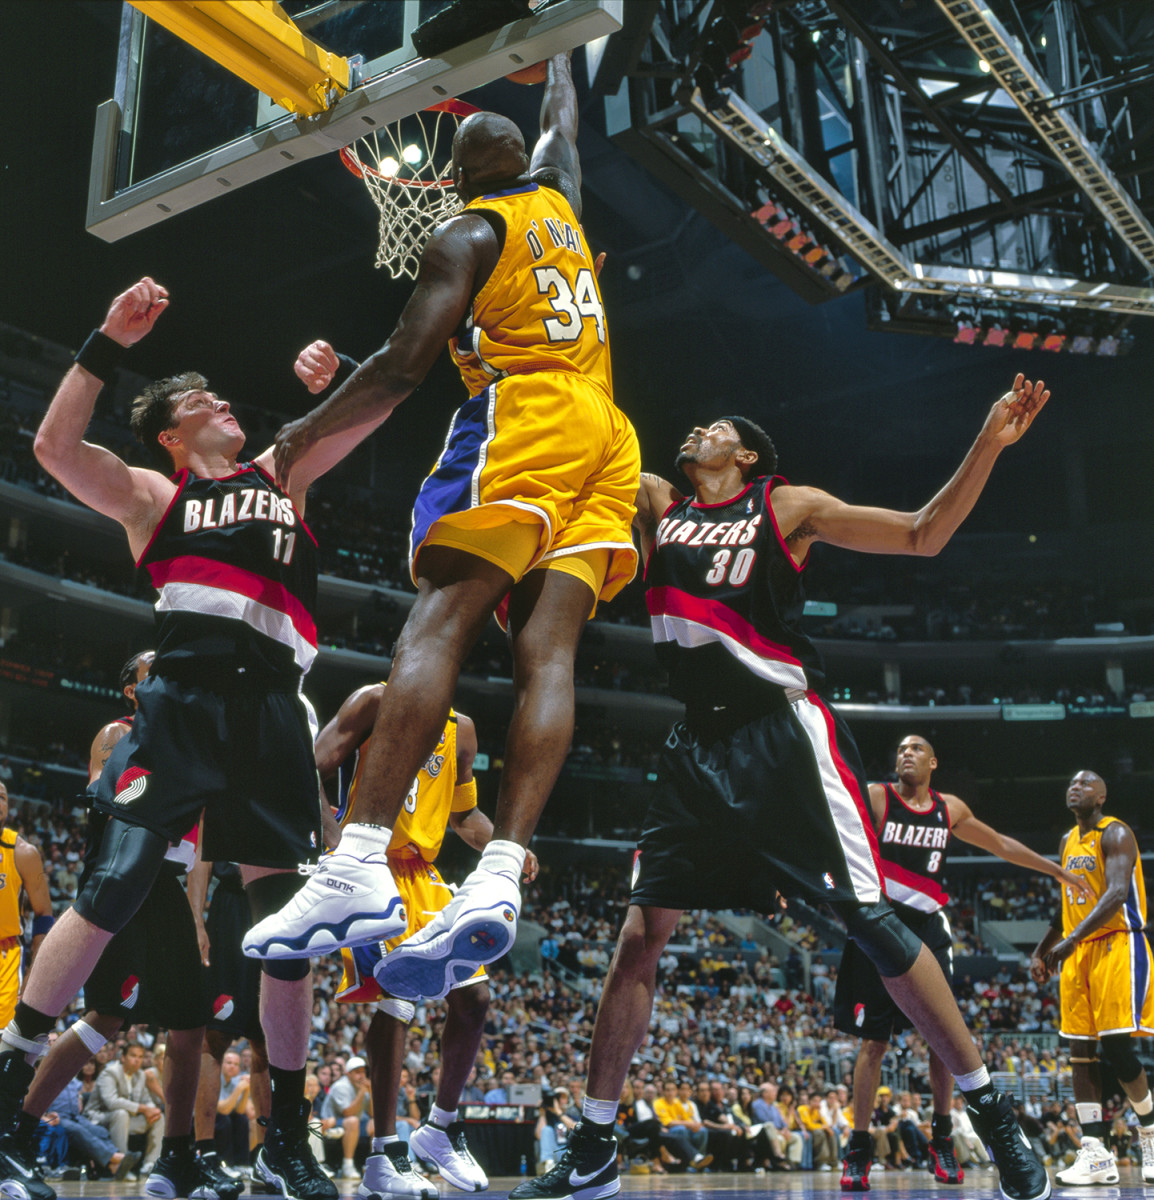 Shaquille O’Neal: Best photos through the years - Sports Illustrated